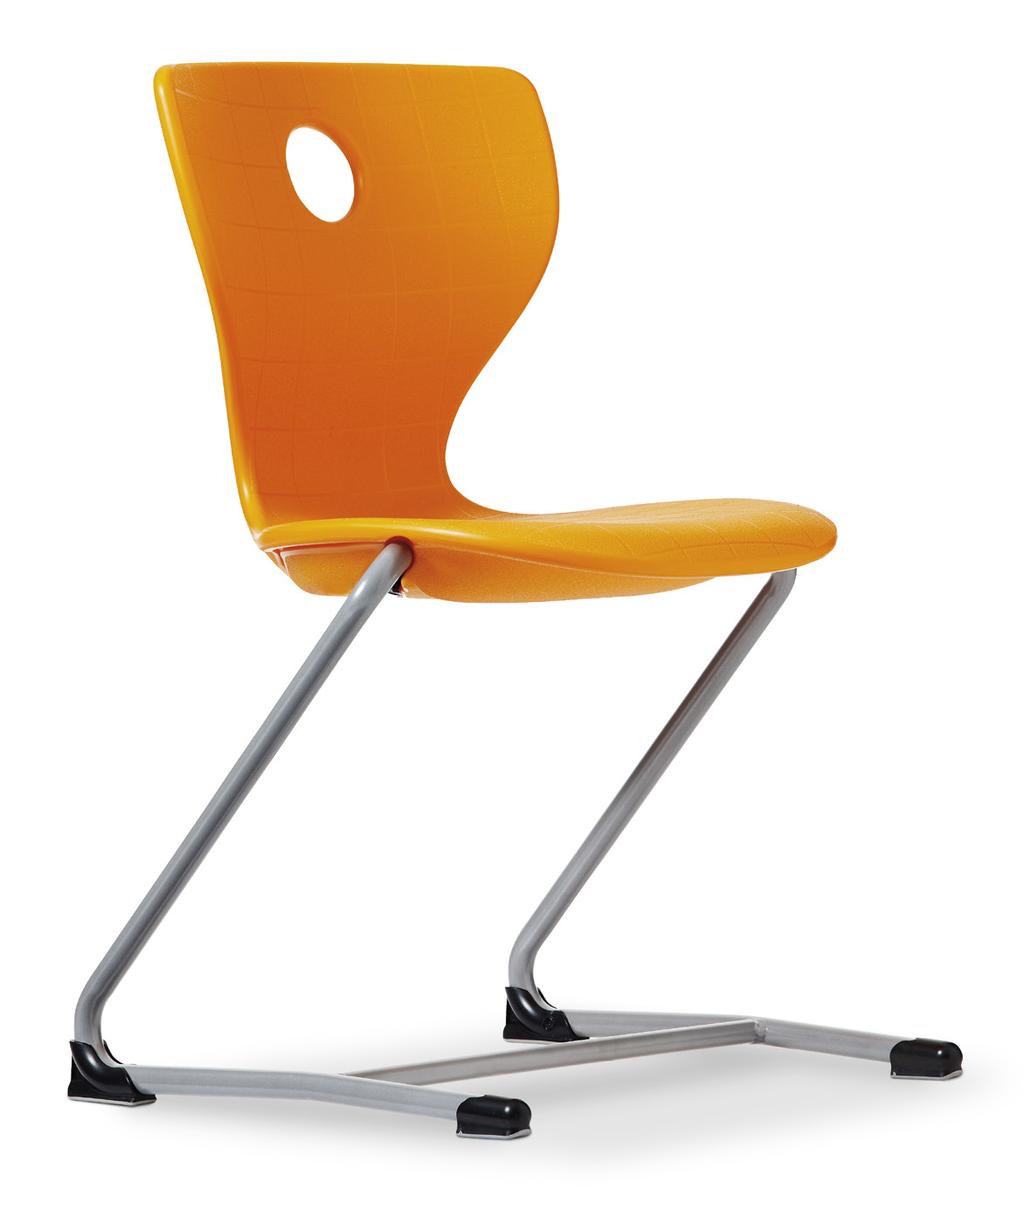 PantoFlex German designed ergo-dynamic student seating a design to enhance the quality of life. Designed by one of the world s greatest furniture designers, Verner Panton.